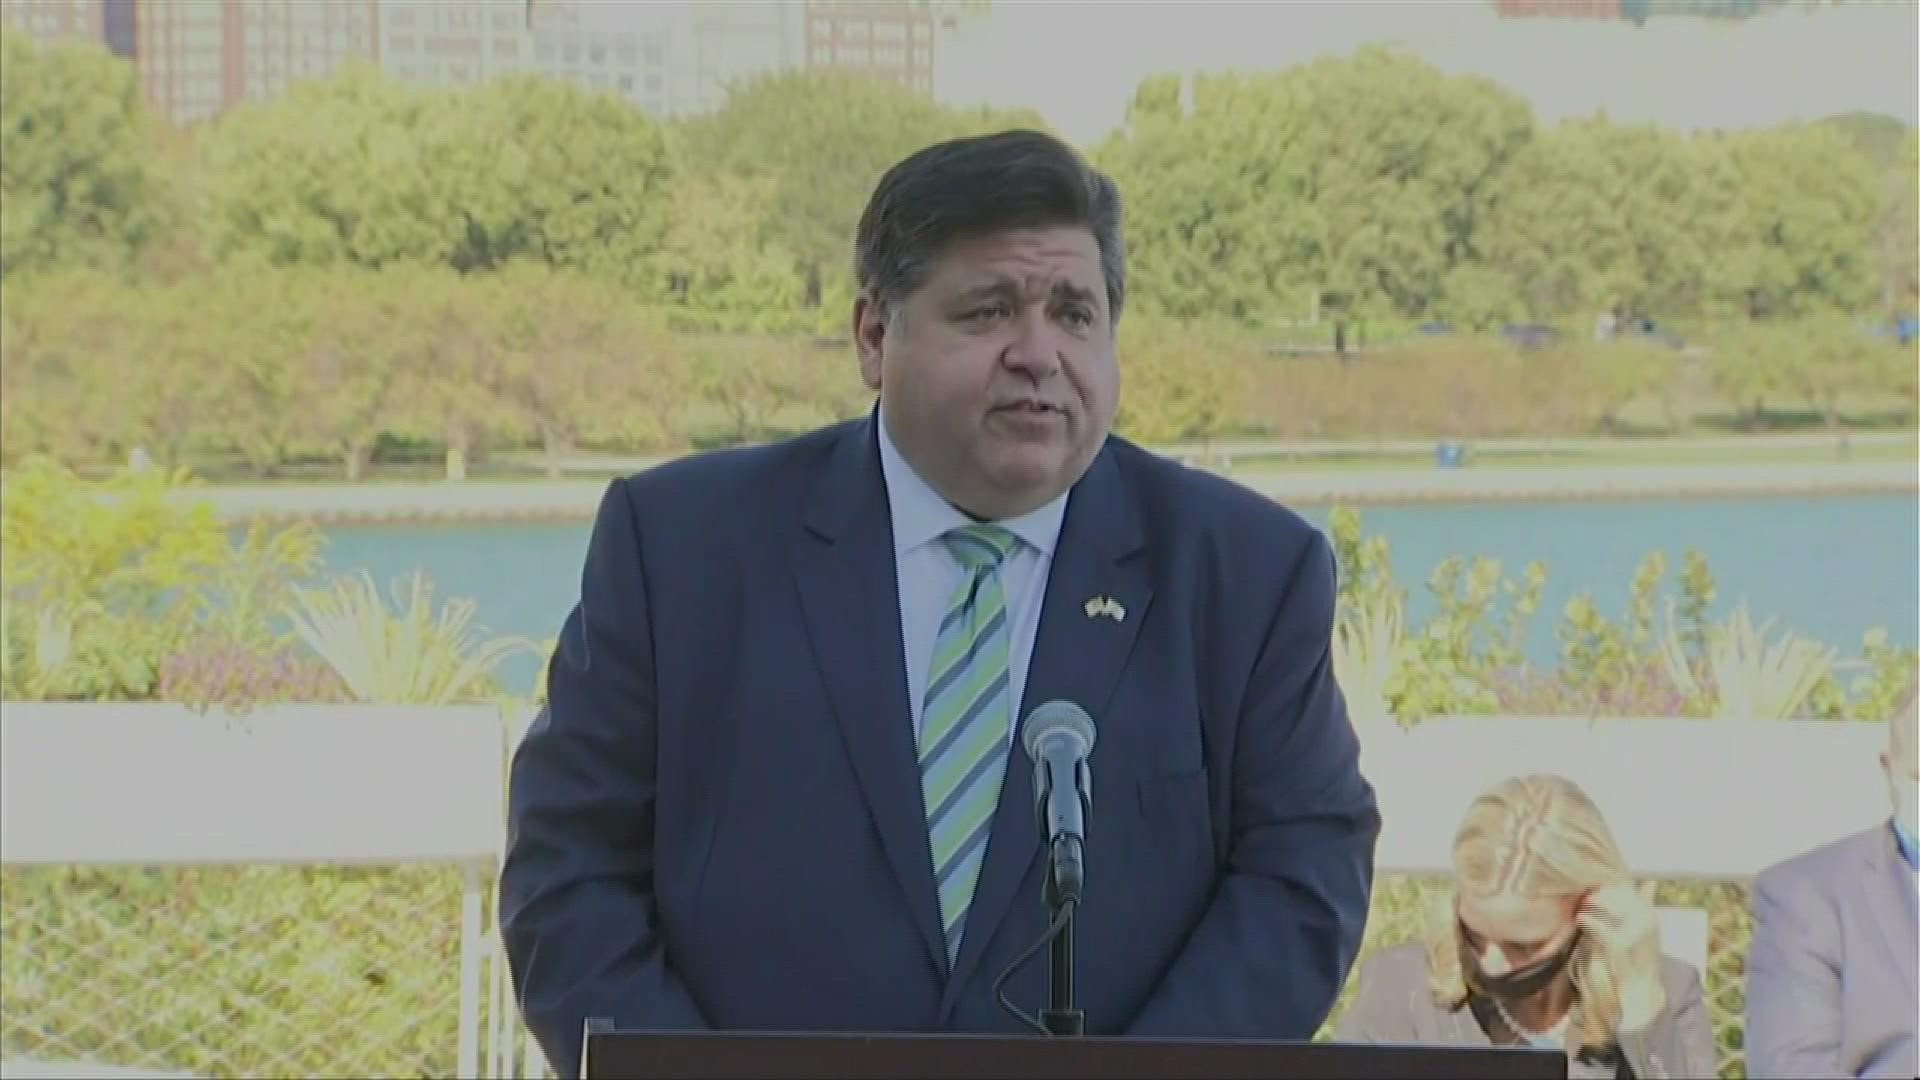 A historic energy legislation signed by Governor J.B. Pritzker will make Illinois a national leader in combating climate change.